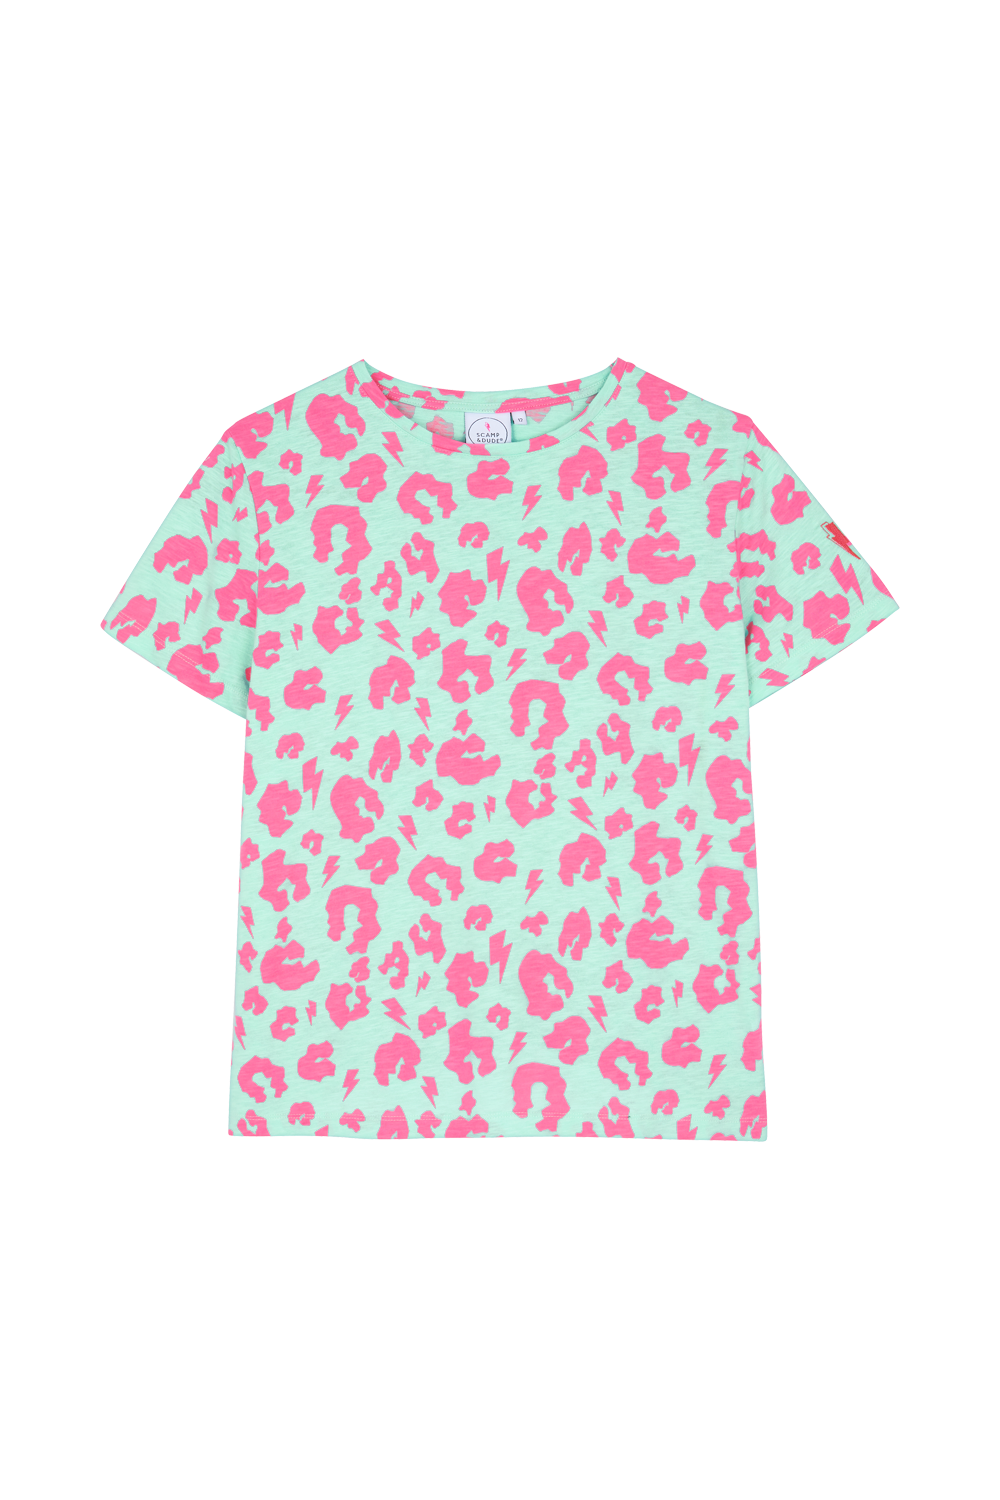 Green with Neon Pink Leopard T-Shirt